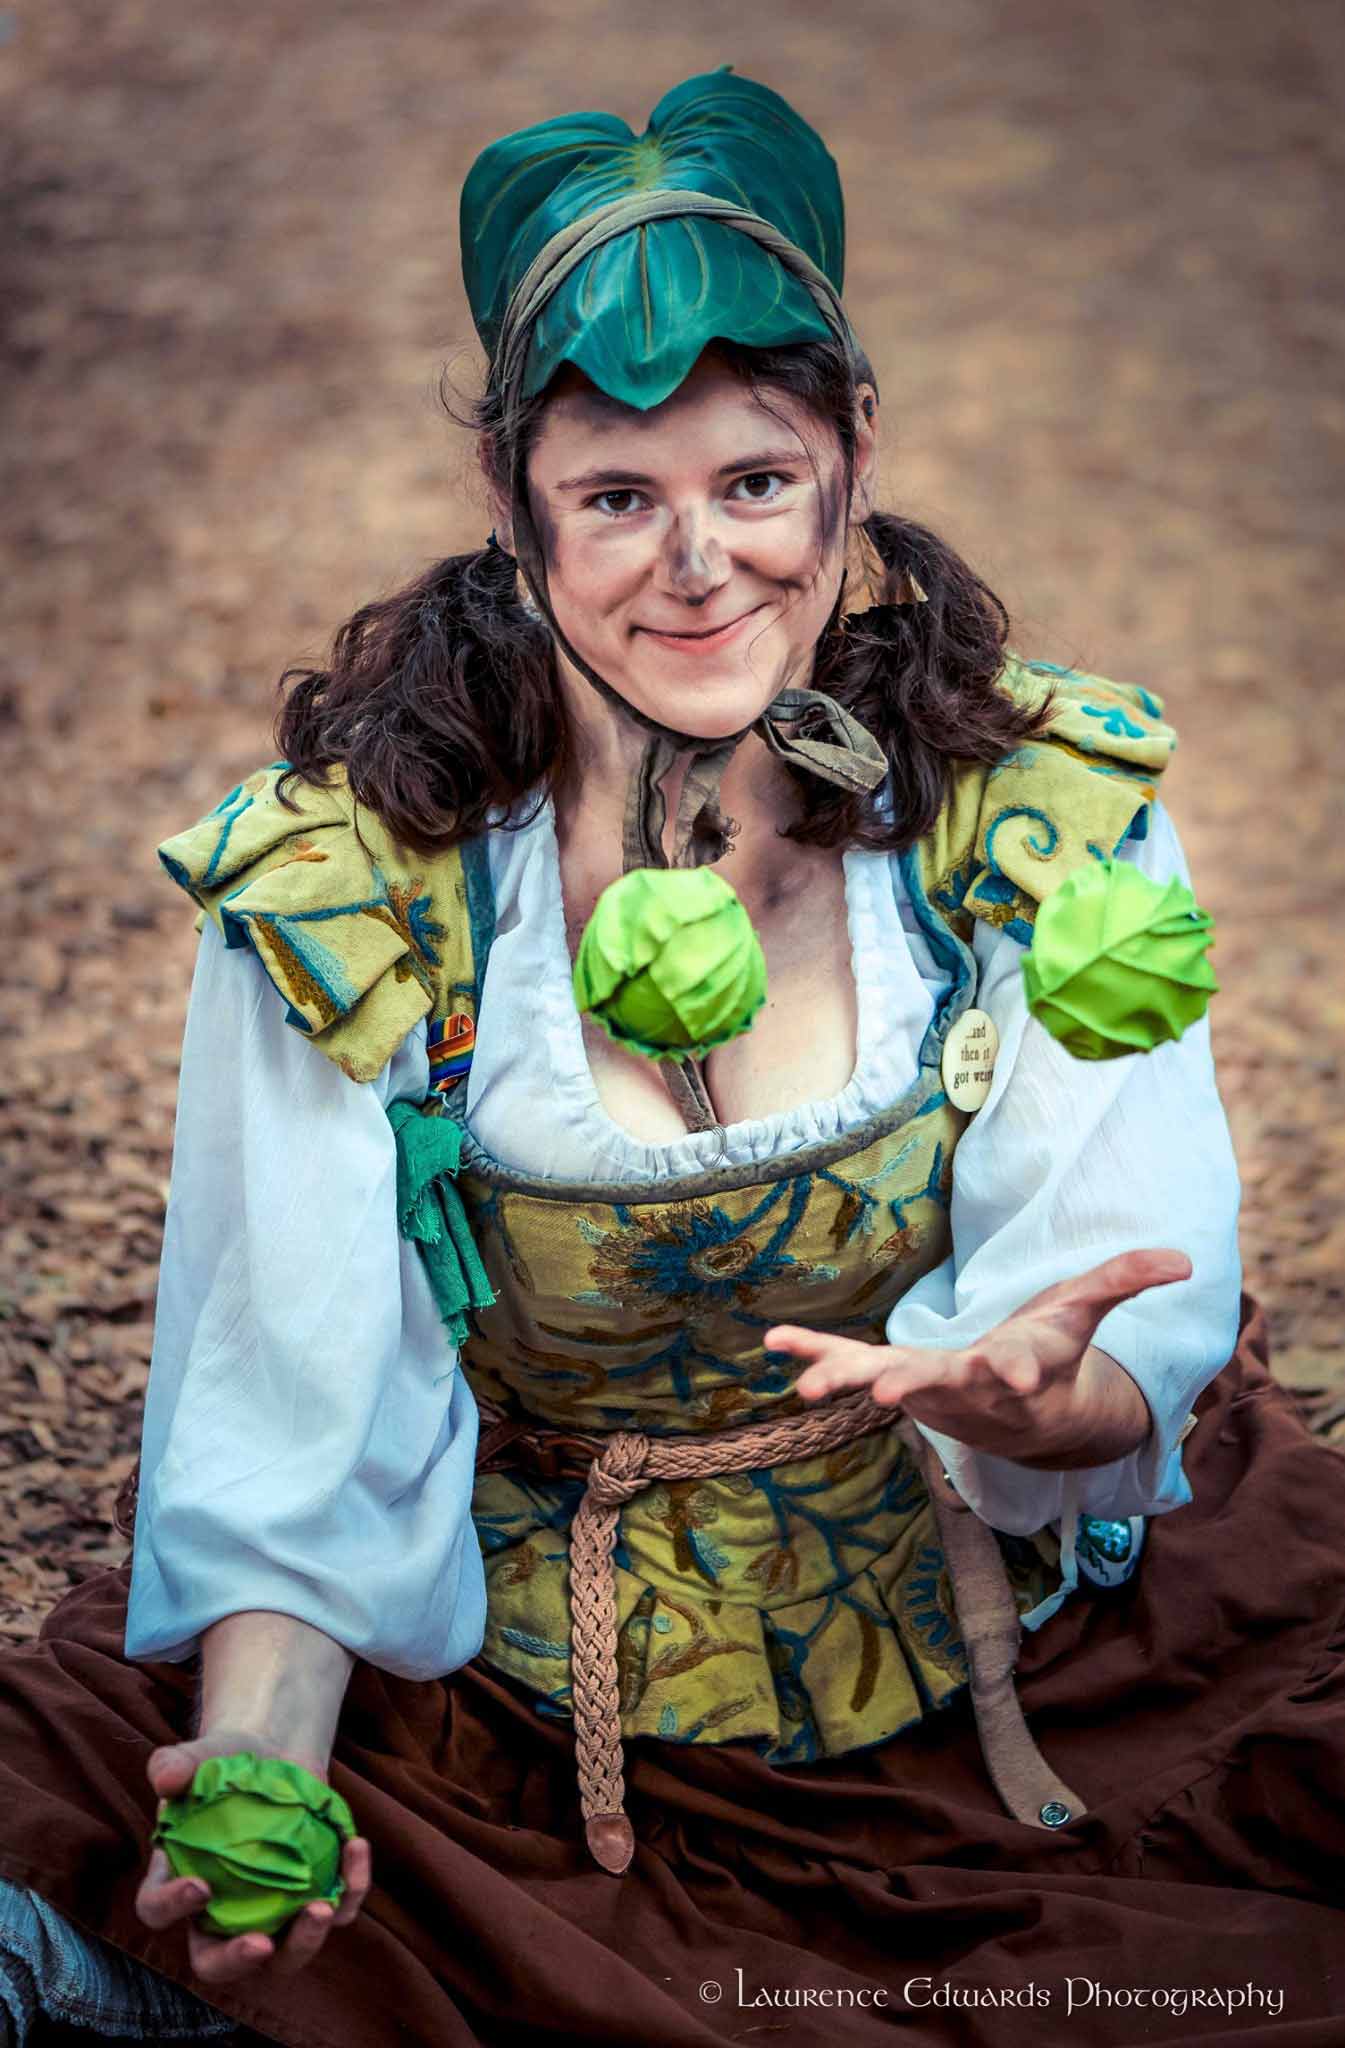 Headshot of Cabbage the Peasant juggling three balls that look like cabbages